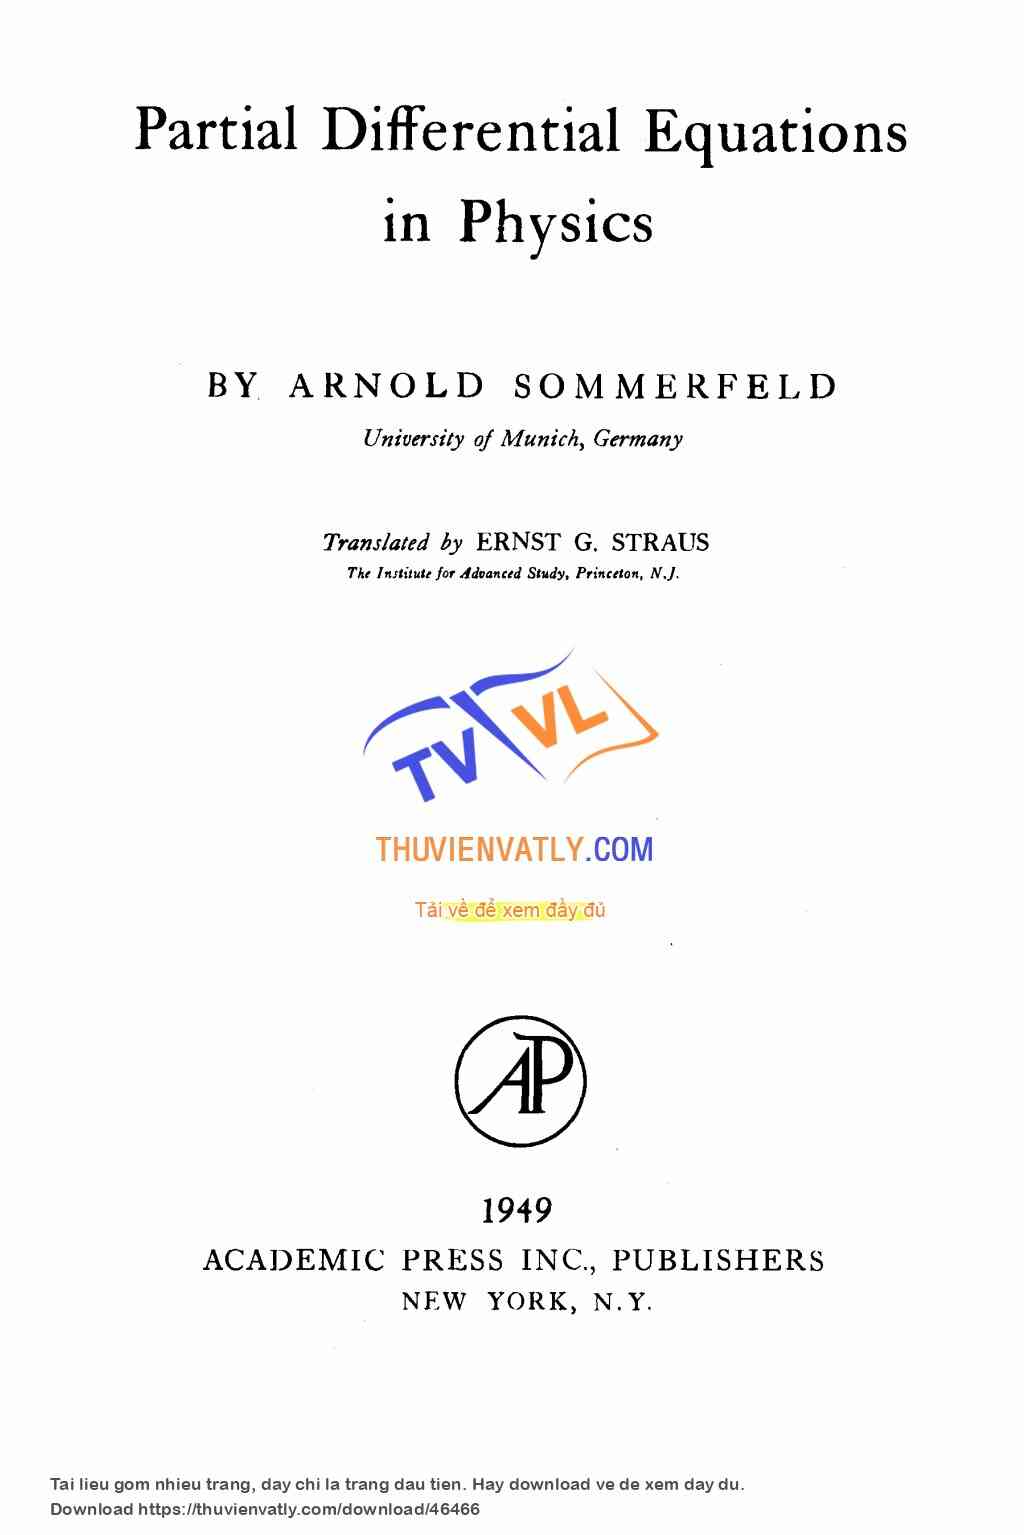 Partial Differential Equations in Physics -  Arnold Sommerfeld